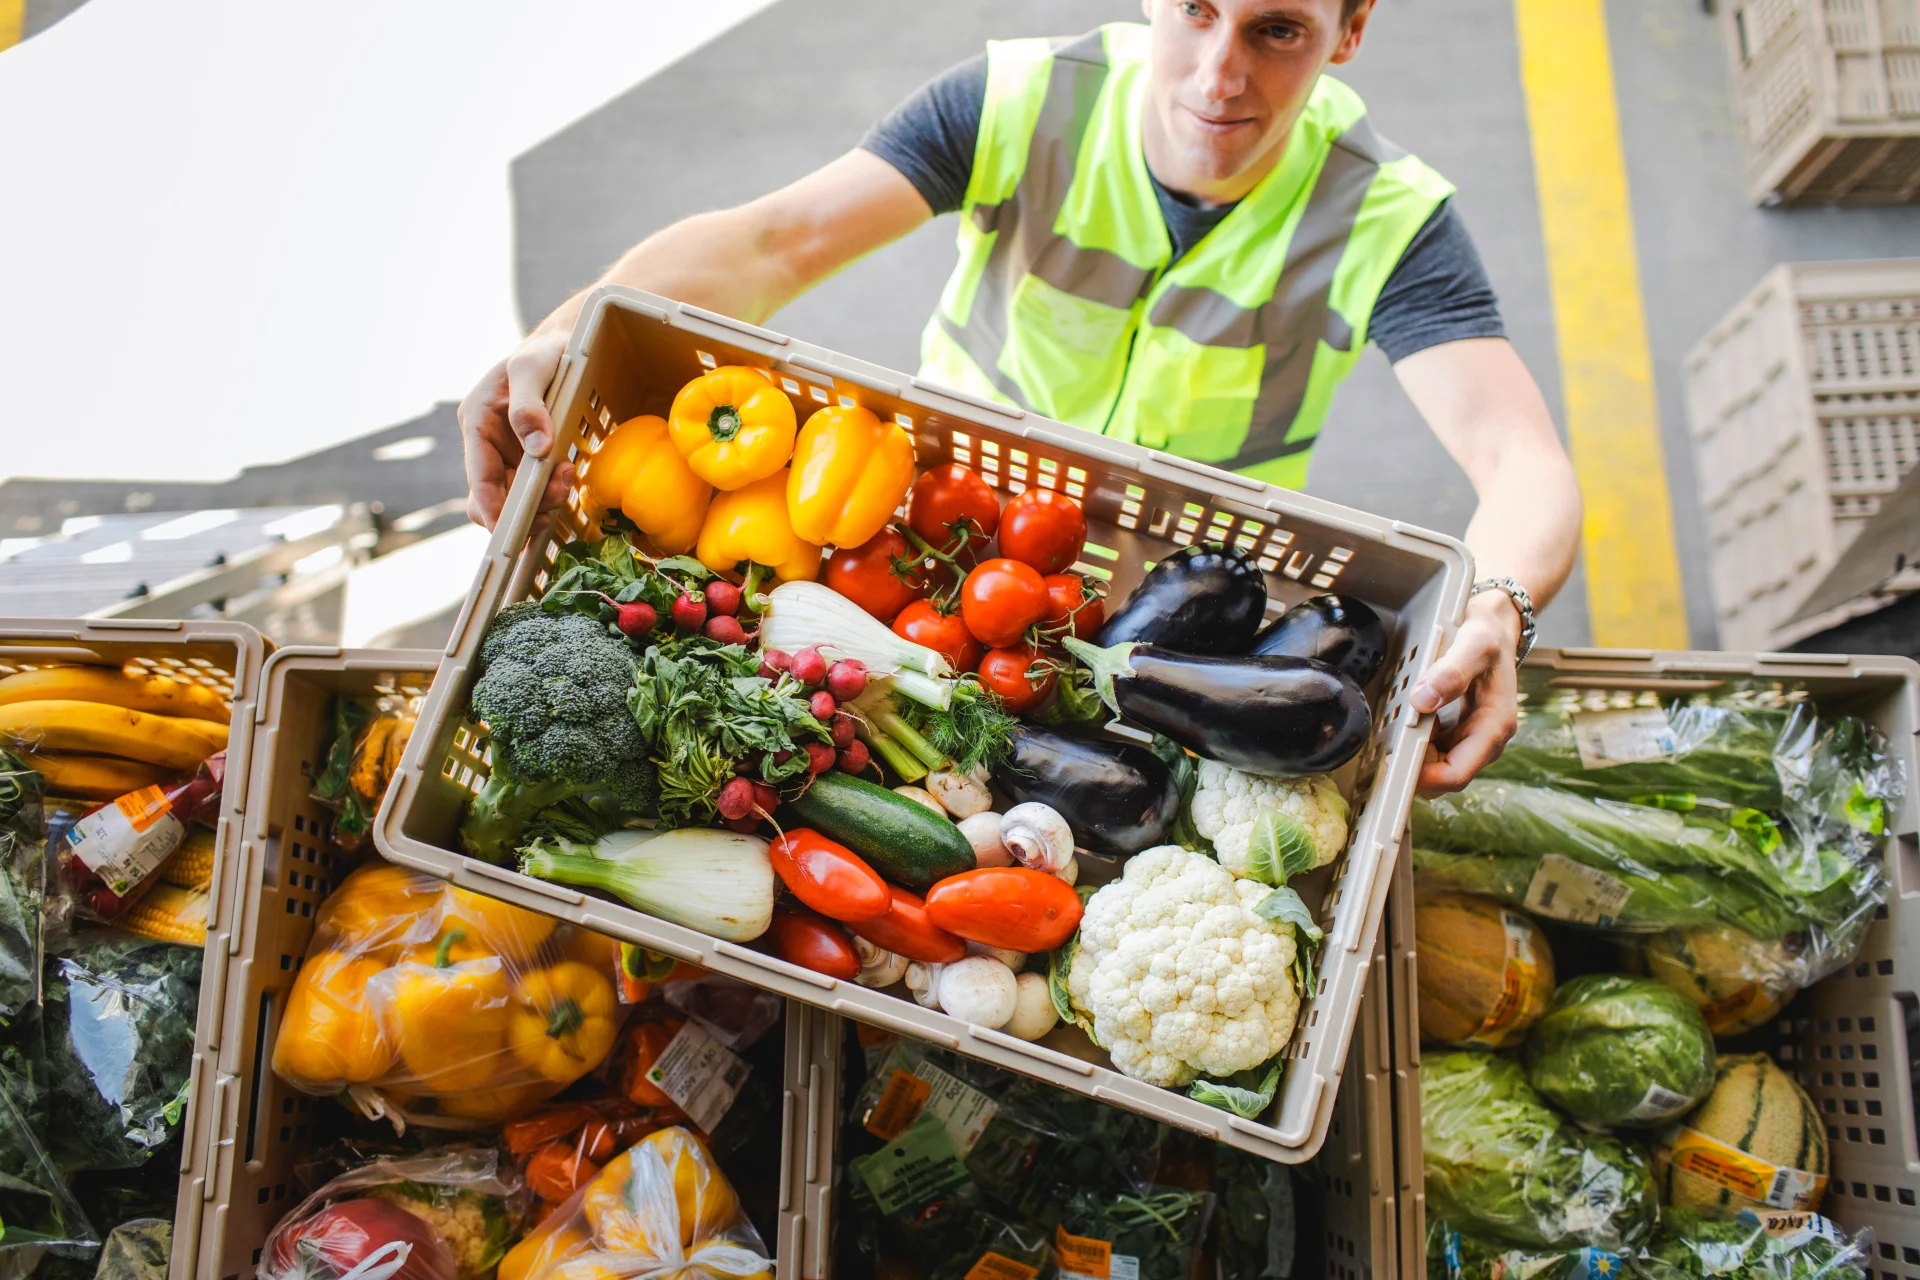 A man in a high-visibility vest stacks a box filled with colourful vegetables on top of other vegetable boxes.